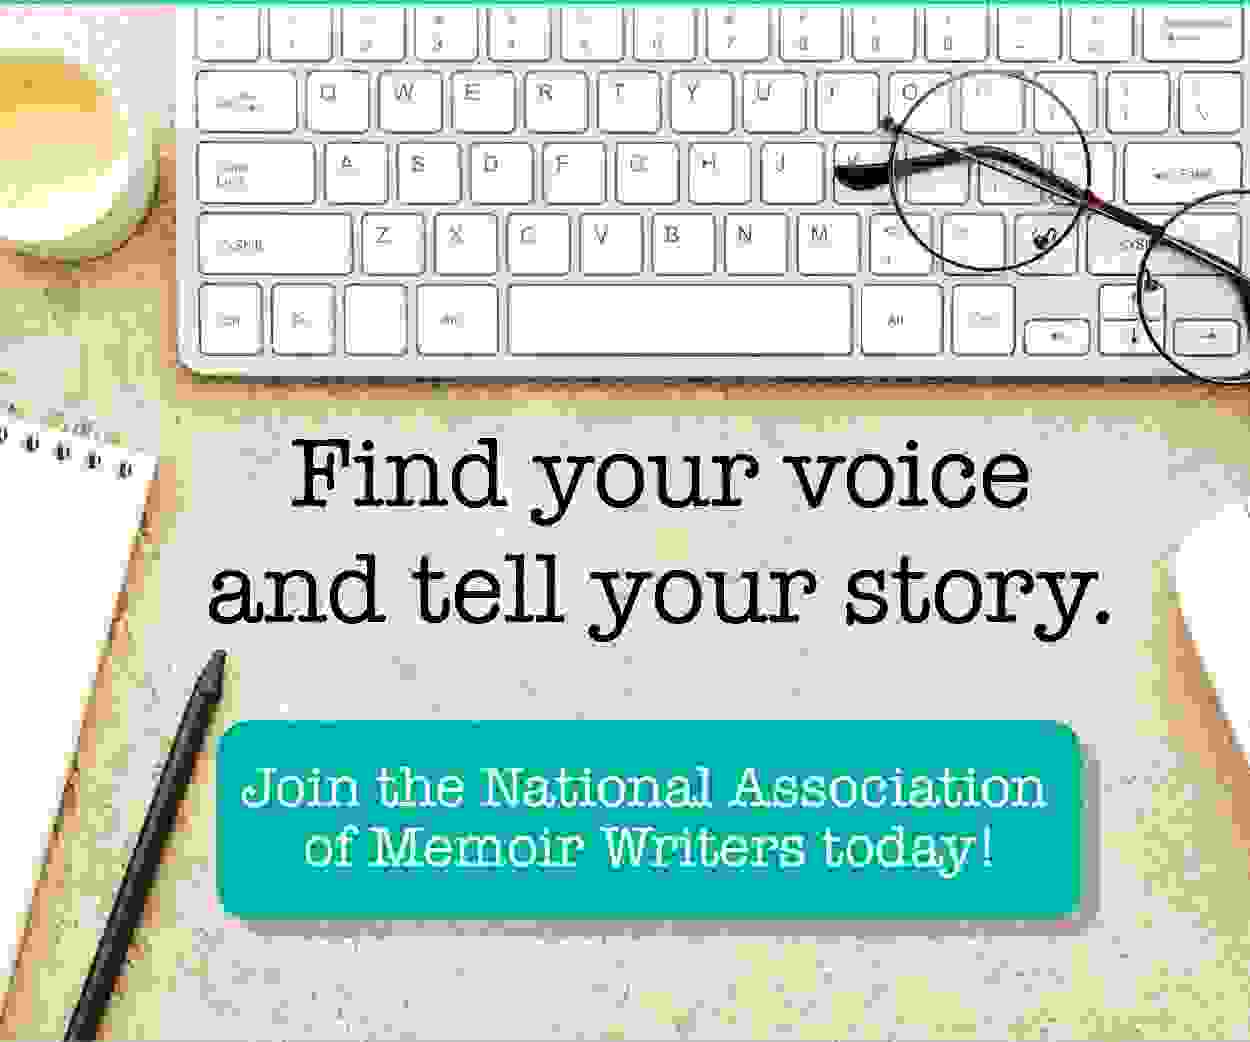 join the national association of memoir writers today!